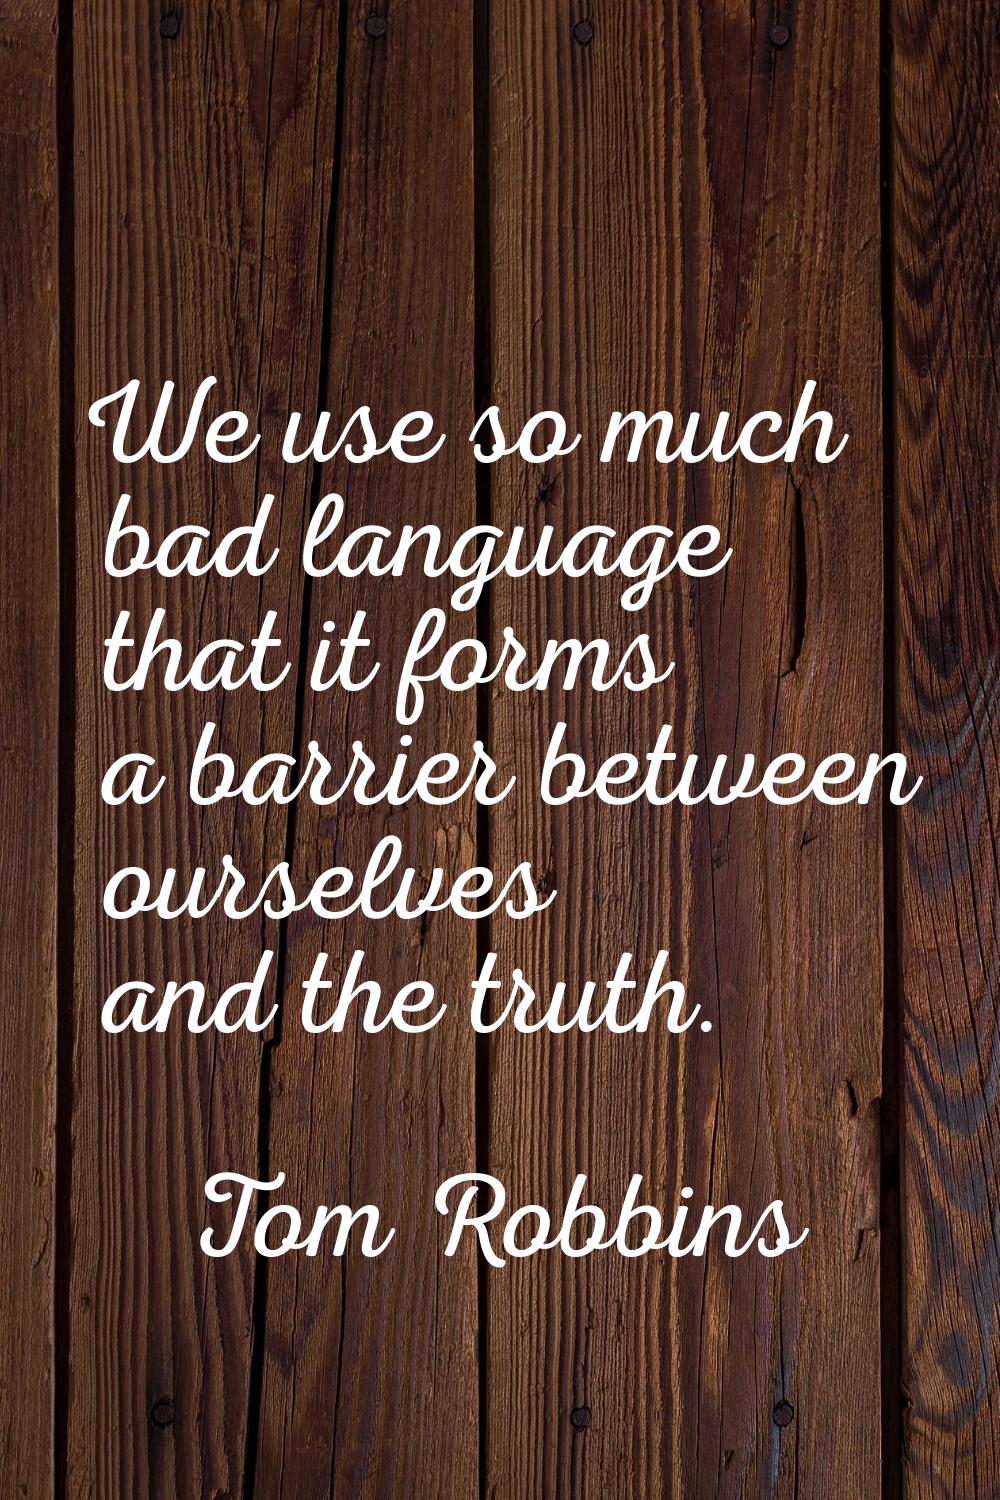 We use so much bad language that it forms a barrier between ourselves and the truth.